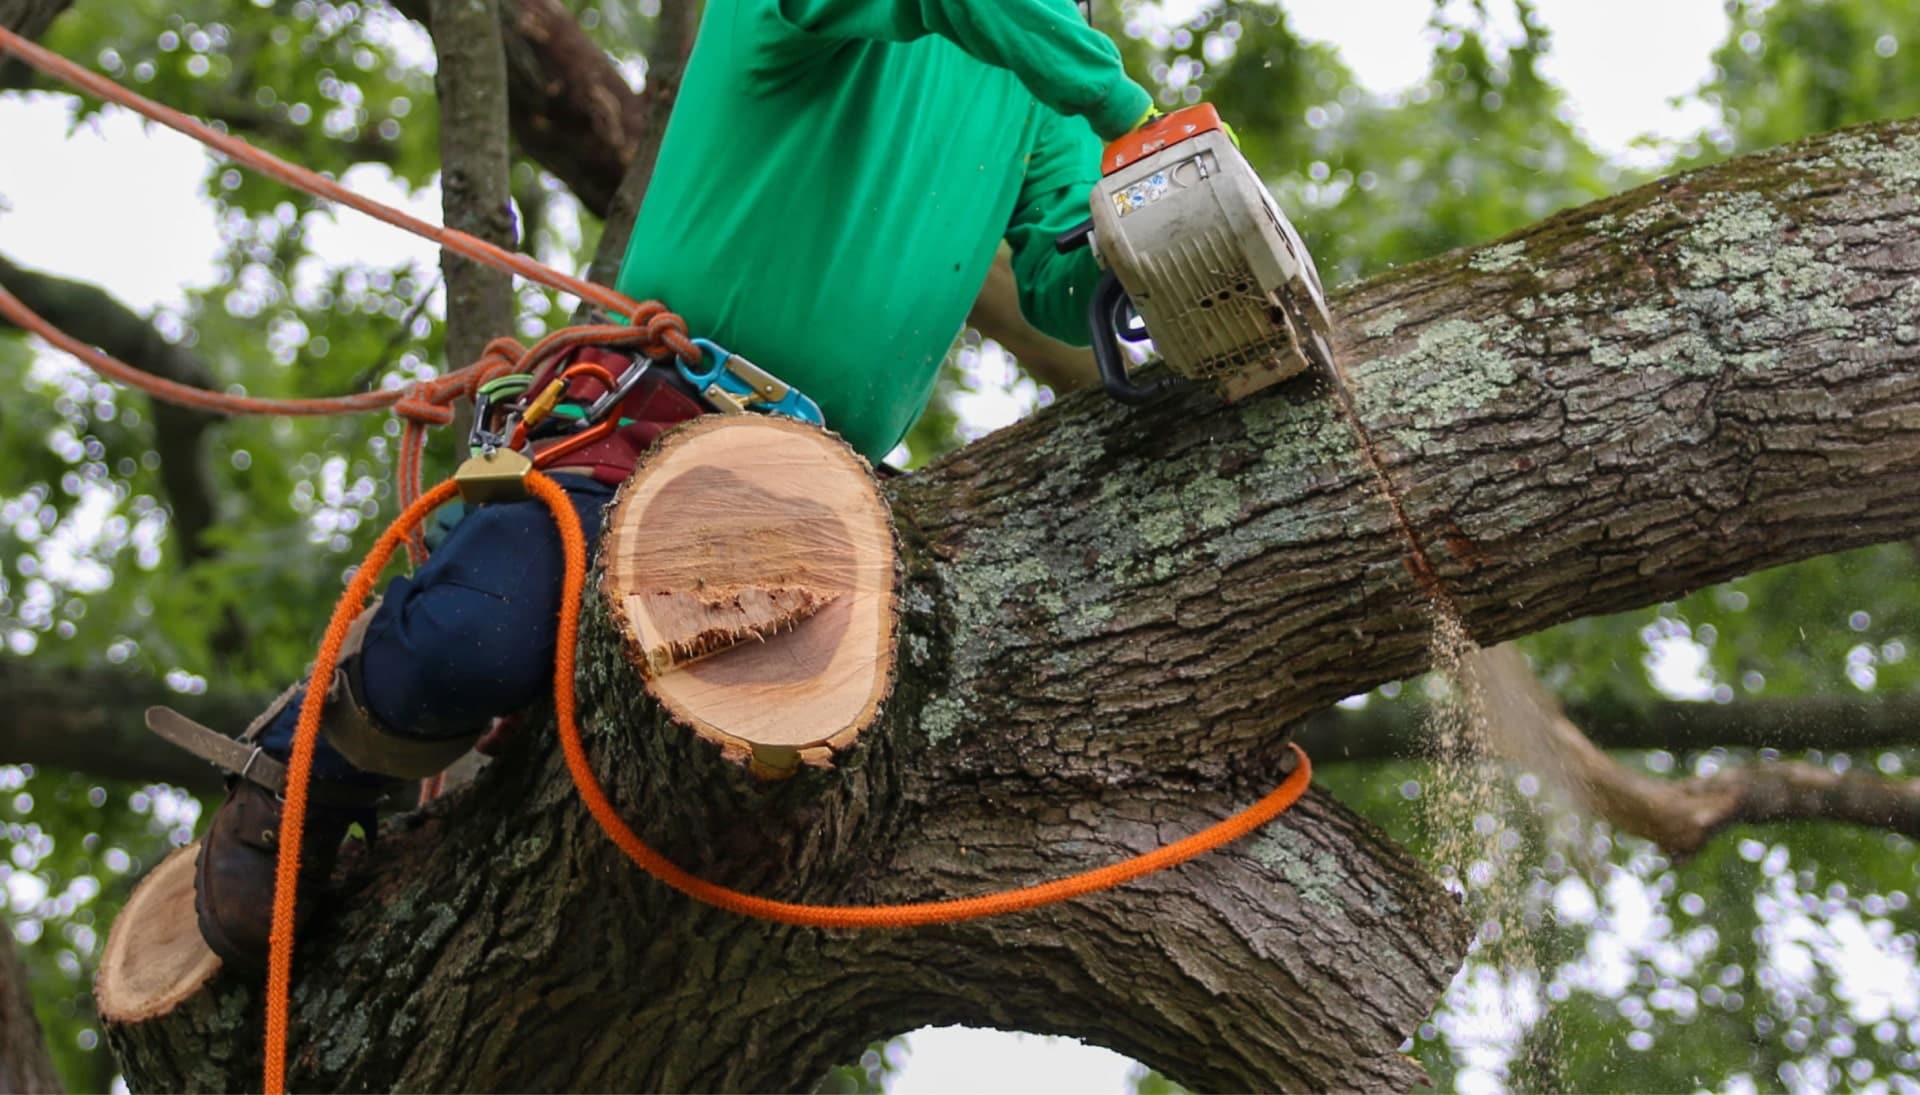 Shed your worries away with best tree removal in Newnan